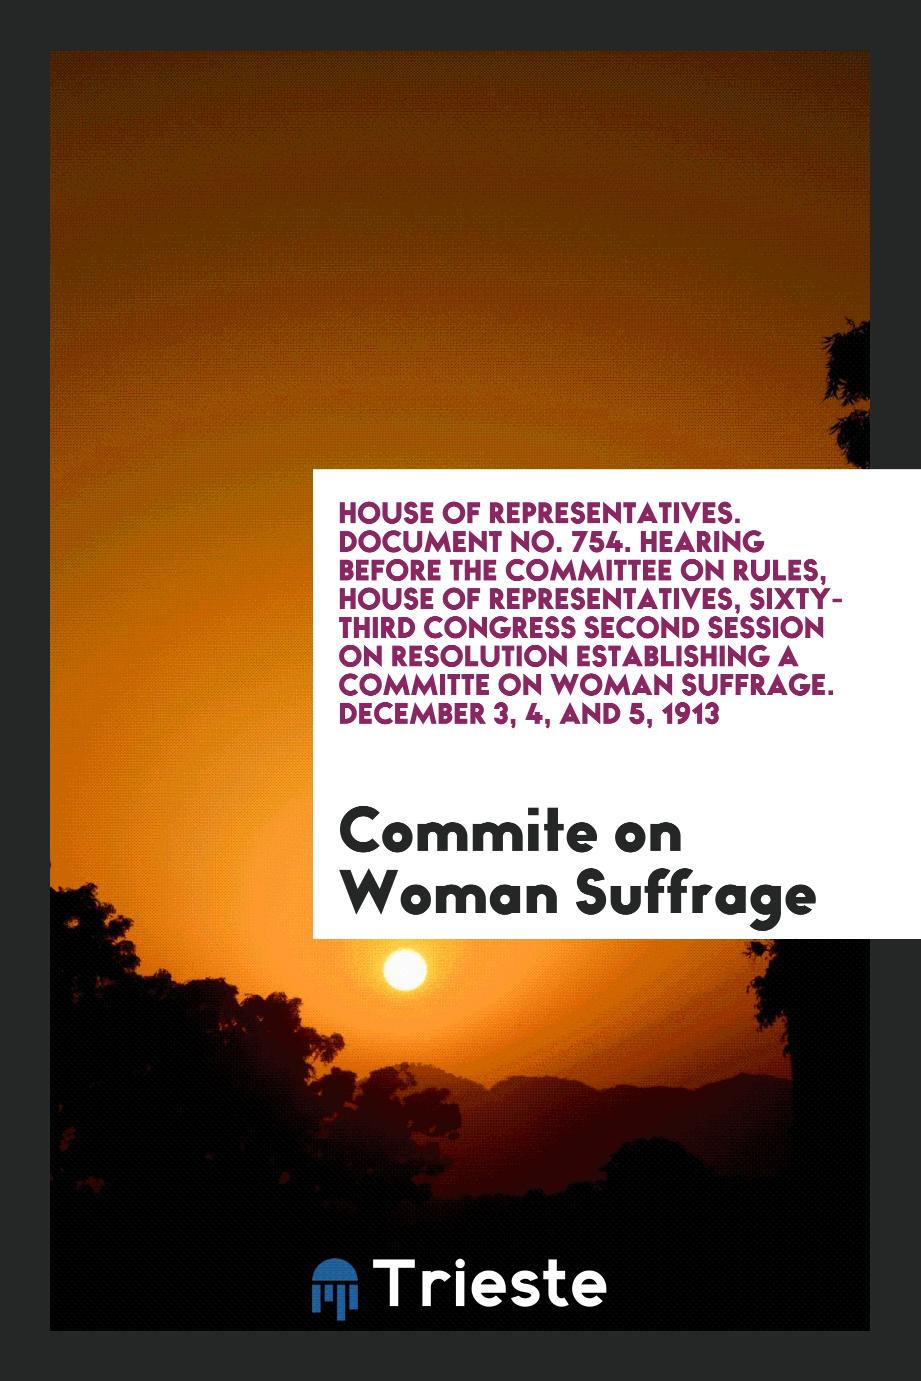 House of Representatives. Document No. 754. Hearing before the Committee on Rules, House of Representatives, Sixty-Third Congress Second Session on Resolution Establishing a Committe on Woman Suffrage. December 3, 4, and 5, 1913